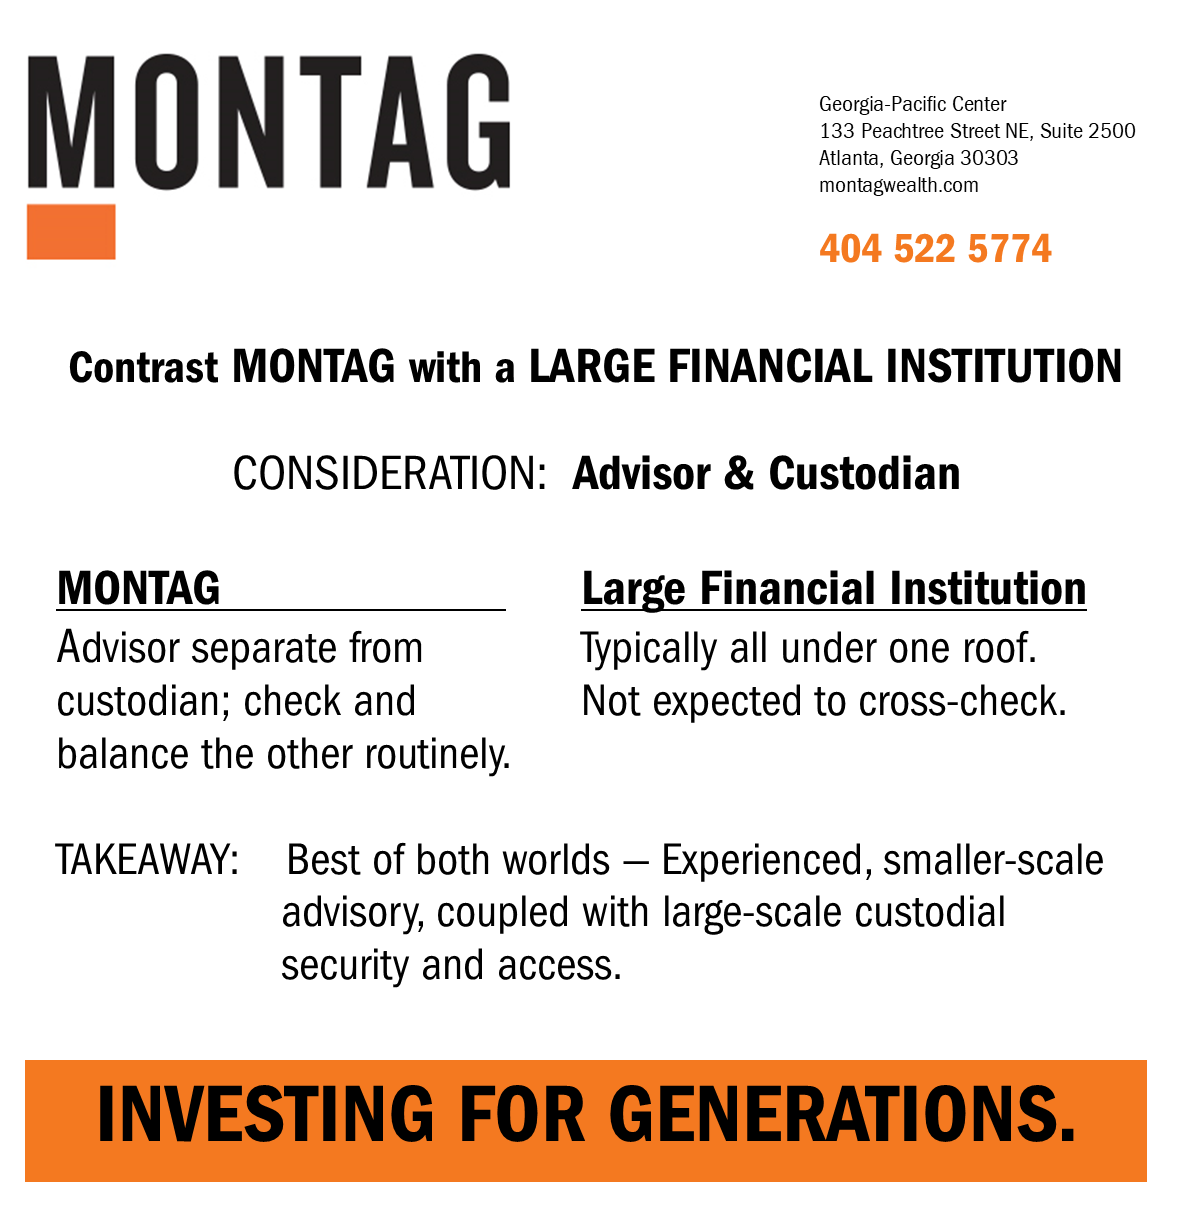 Contrast MONTAG with a Large Financial Institution - Advisor & Custodian